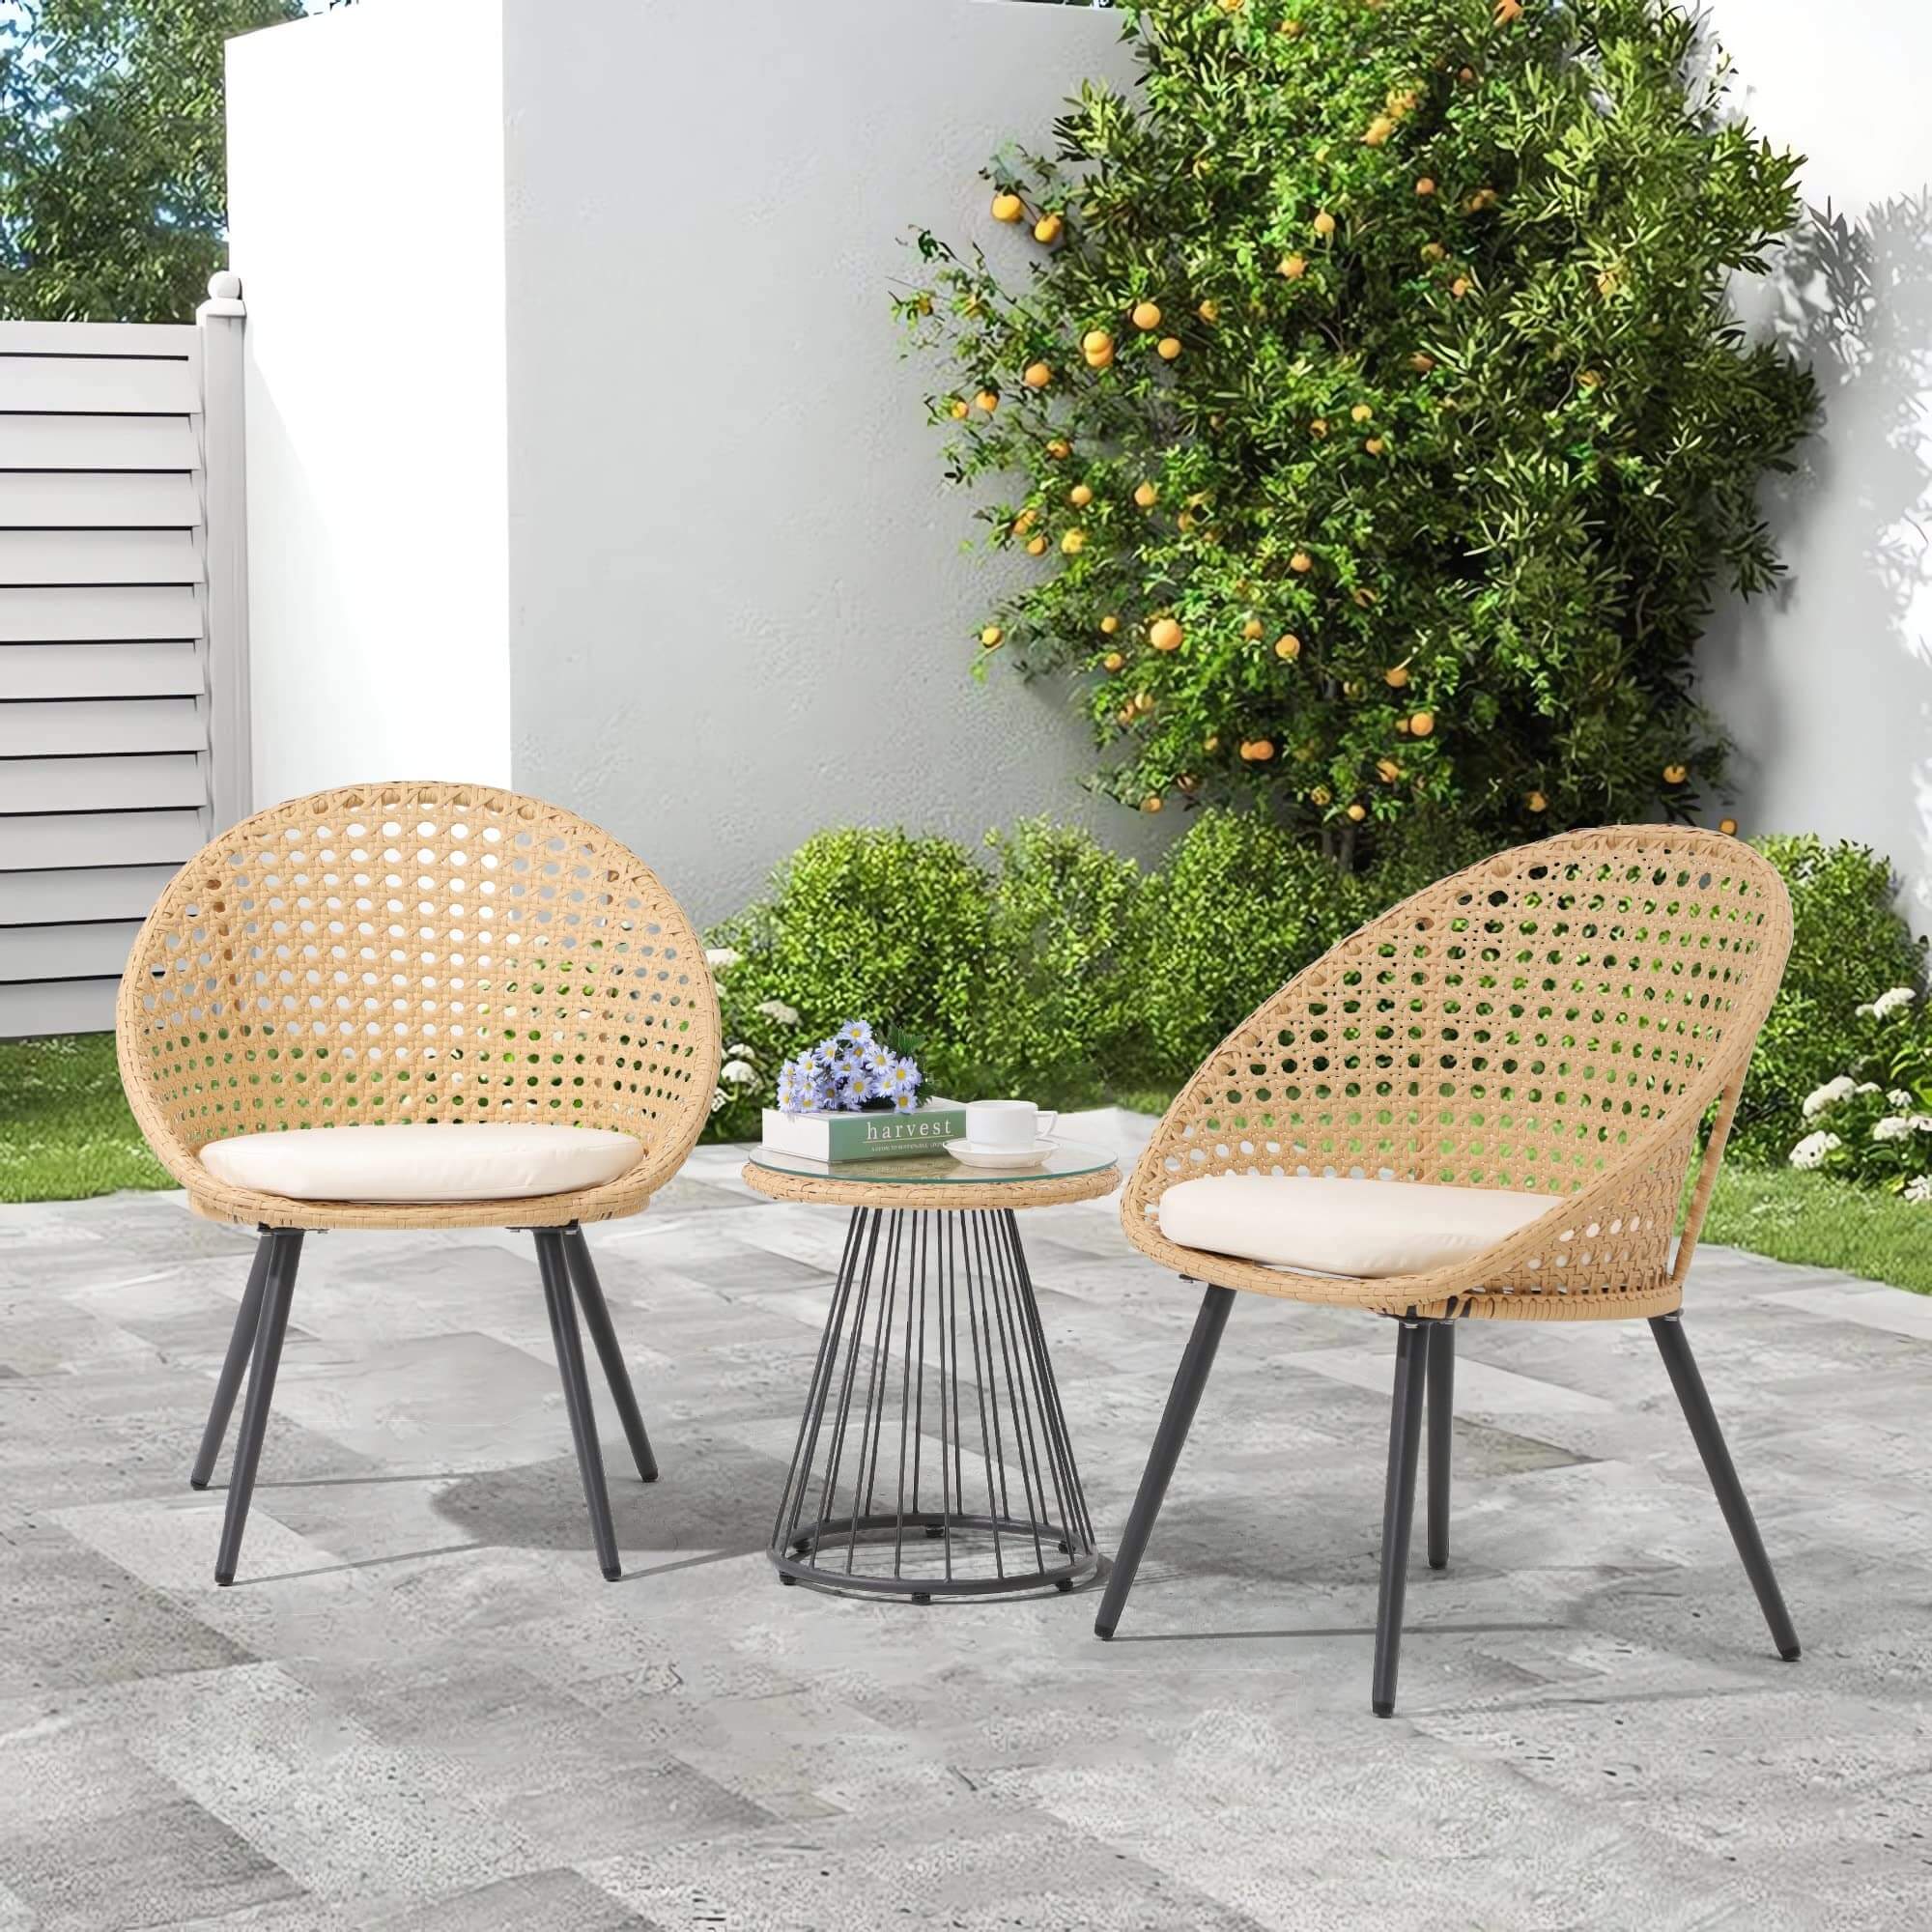 3 Piece Patio Bistro Set, Outdoor Wicker Conversation Balcony Chairs Set with Glass Top Coffee Table